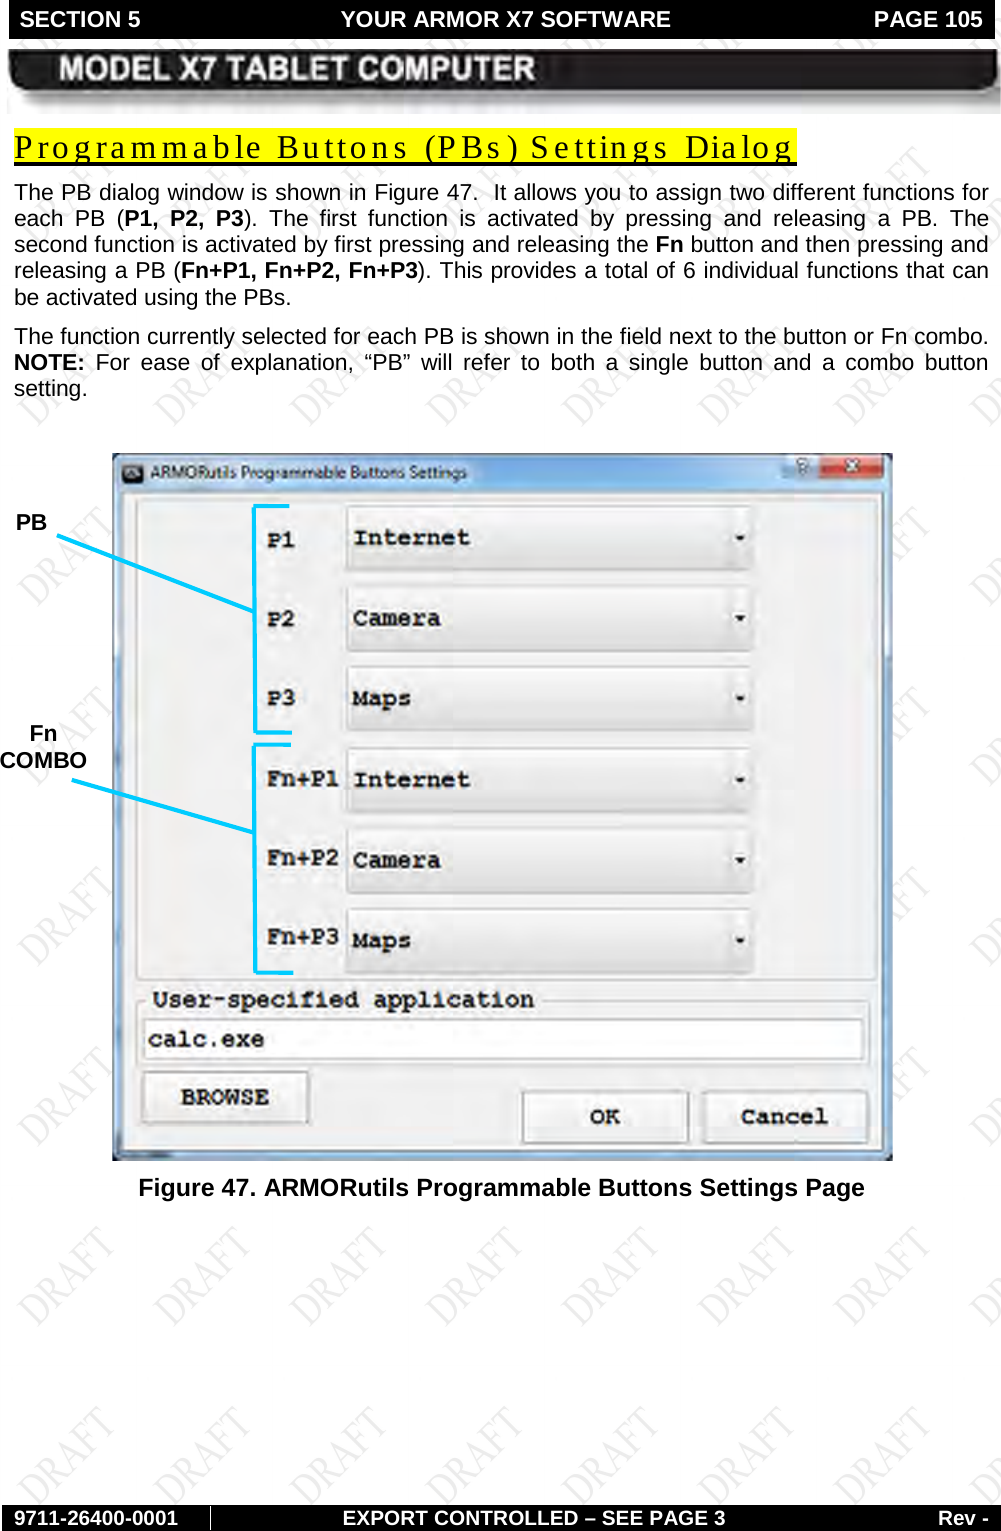 SECTION 5 YOUR ARMOR X7 SOFTWARE  PAGE 105        9711-26400-0001 EXPORT CONTROLLED – SEE PAGE 3 Rev - The PB dialog window is shown in Programmable Buttons  (PBs ) Settings  Dialog Figure 47.  It allows you to assign two different functions for each PB (P1, P2, P3).  The first function is activated by pressing and releasing a PB. The second function is activated by first pressing and releasing the Fn button and then pressing and releasing a PB (Fn+P1, Fn+P2, Fn+P3). This provides a total of 6 individual functions that can be activated using the PBs.  The function currently selected for each PB is shown in the field next to the button or Fn combo. NOTE:  For ease of explanation, “PB” will refer to both a single button and a combo button setting.   Figure 47. ARMORutils Programmable Buttons Settings Page     PB Fn  COMBO 